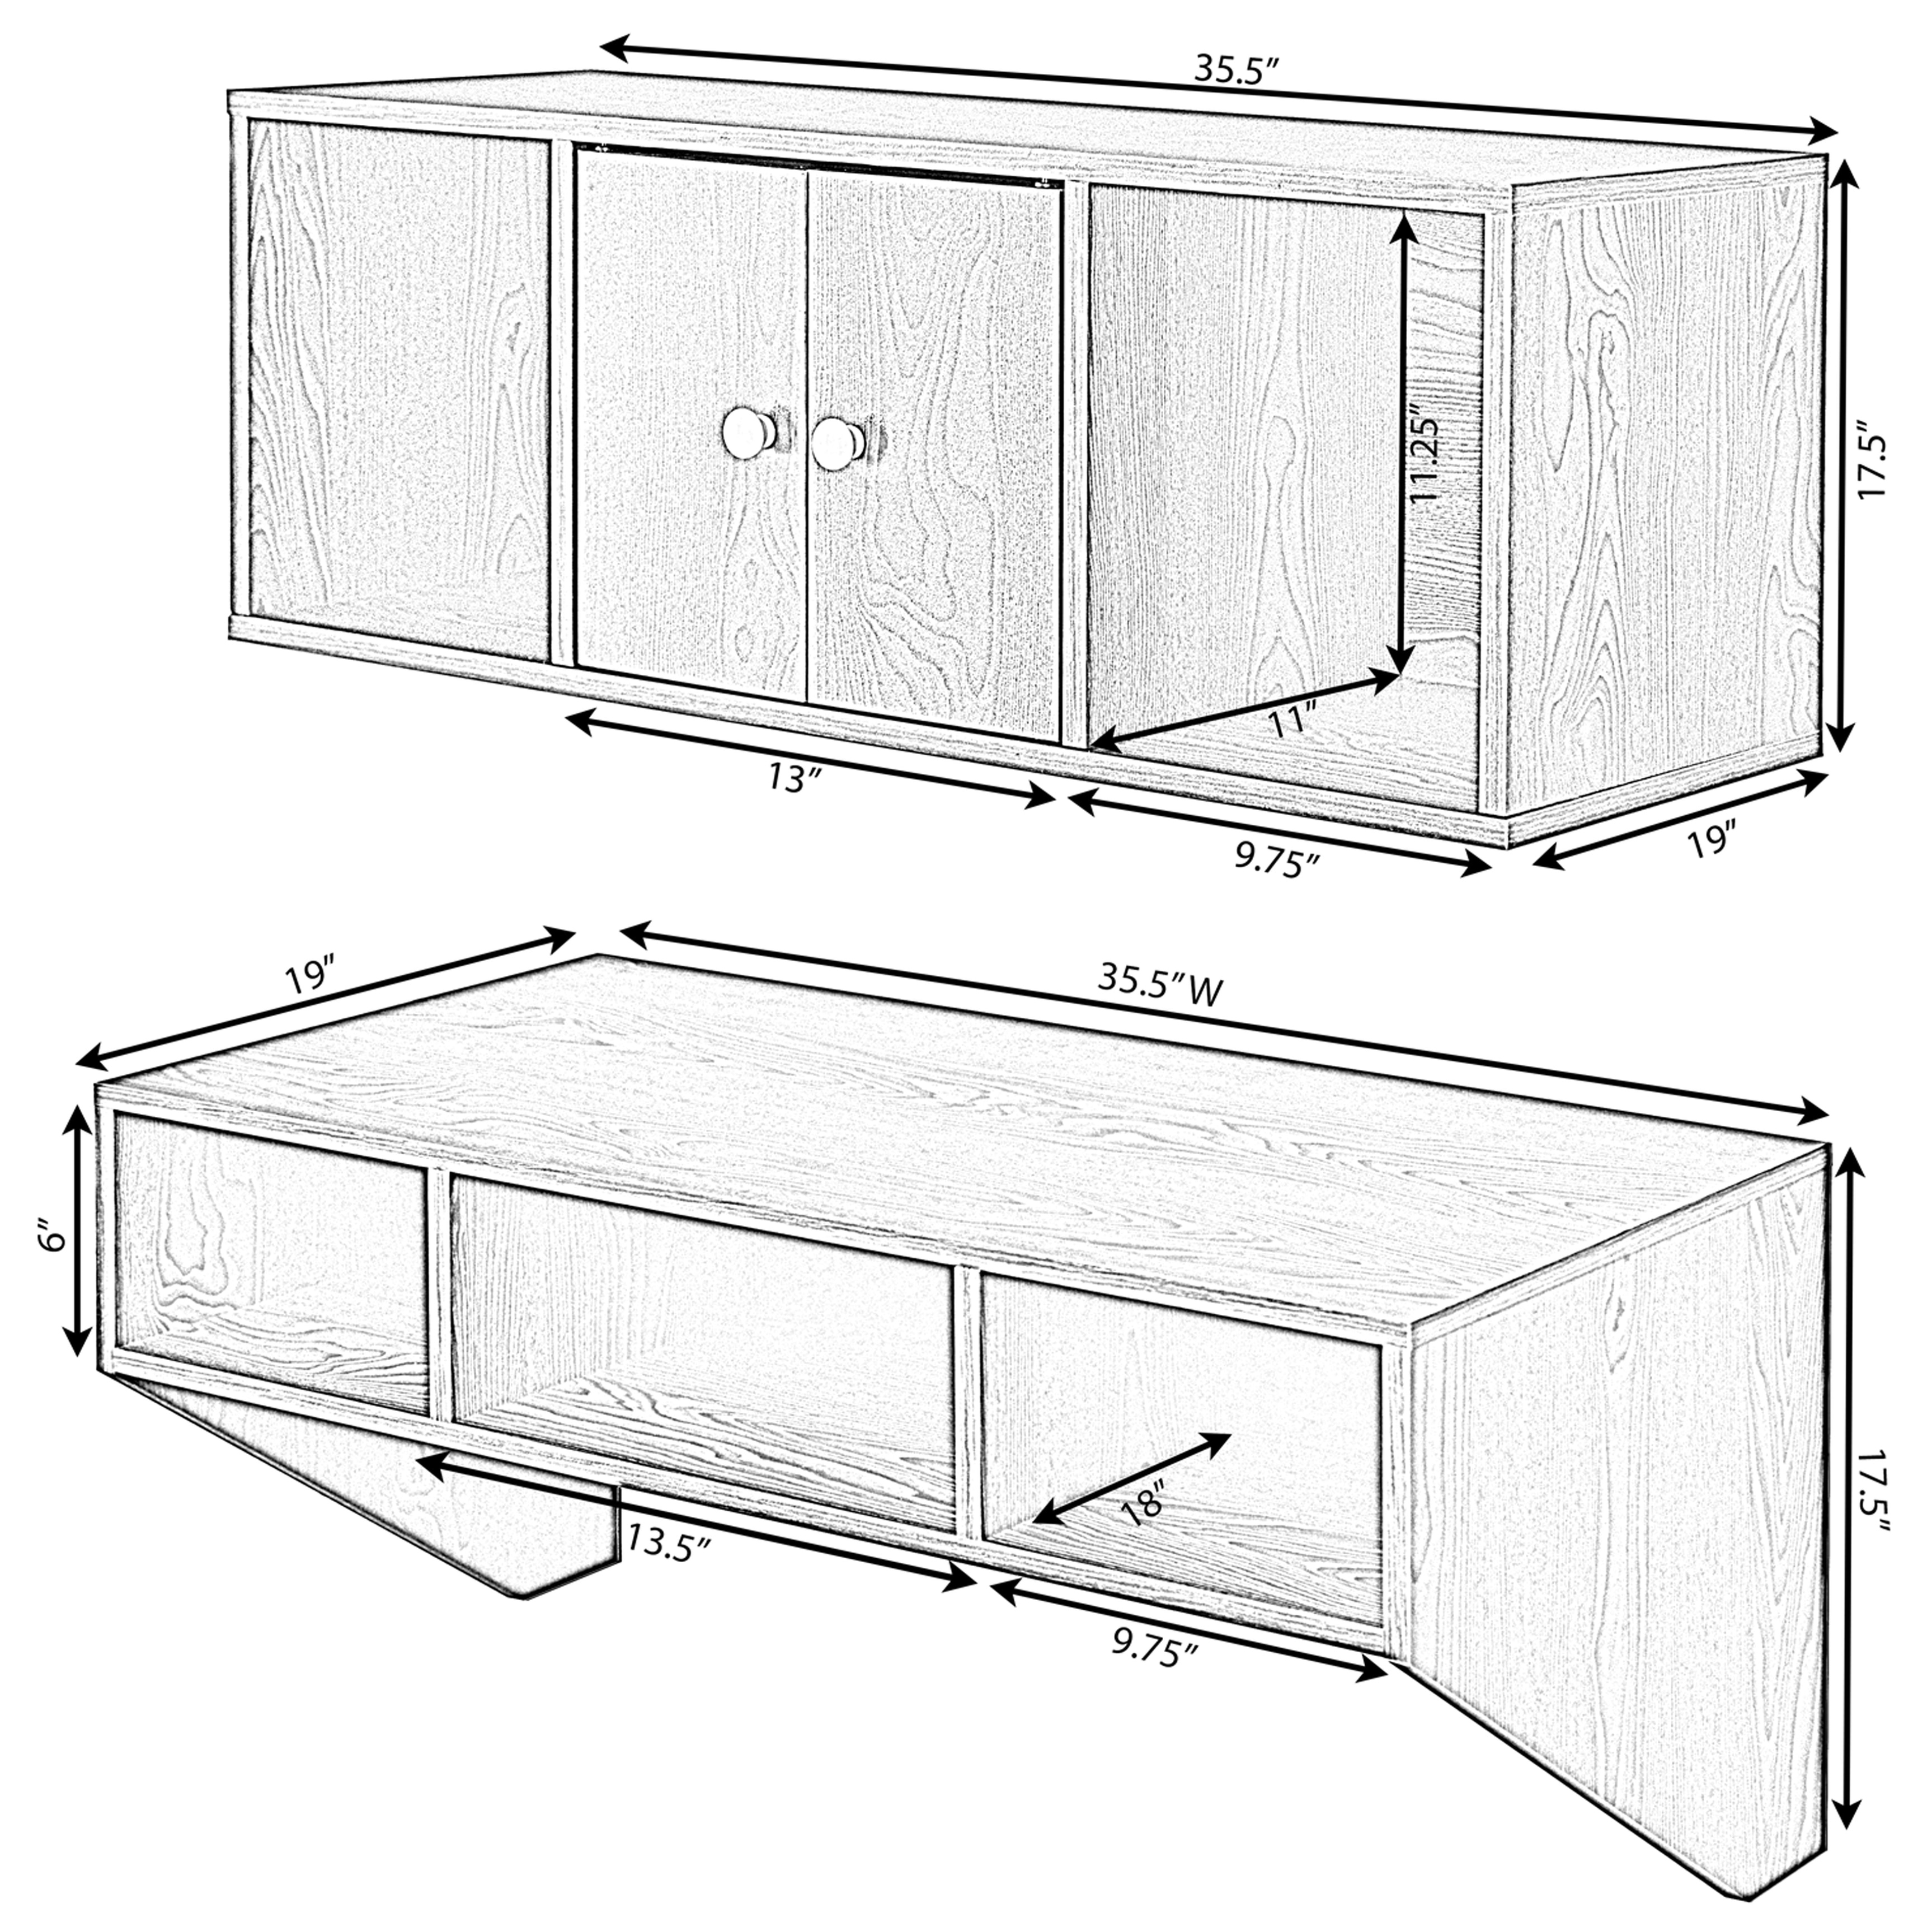 Wall Mounted Desk With Storage Shelves Home Computer Table Floating - Bed  Bath & Beyond - 32561365